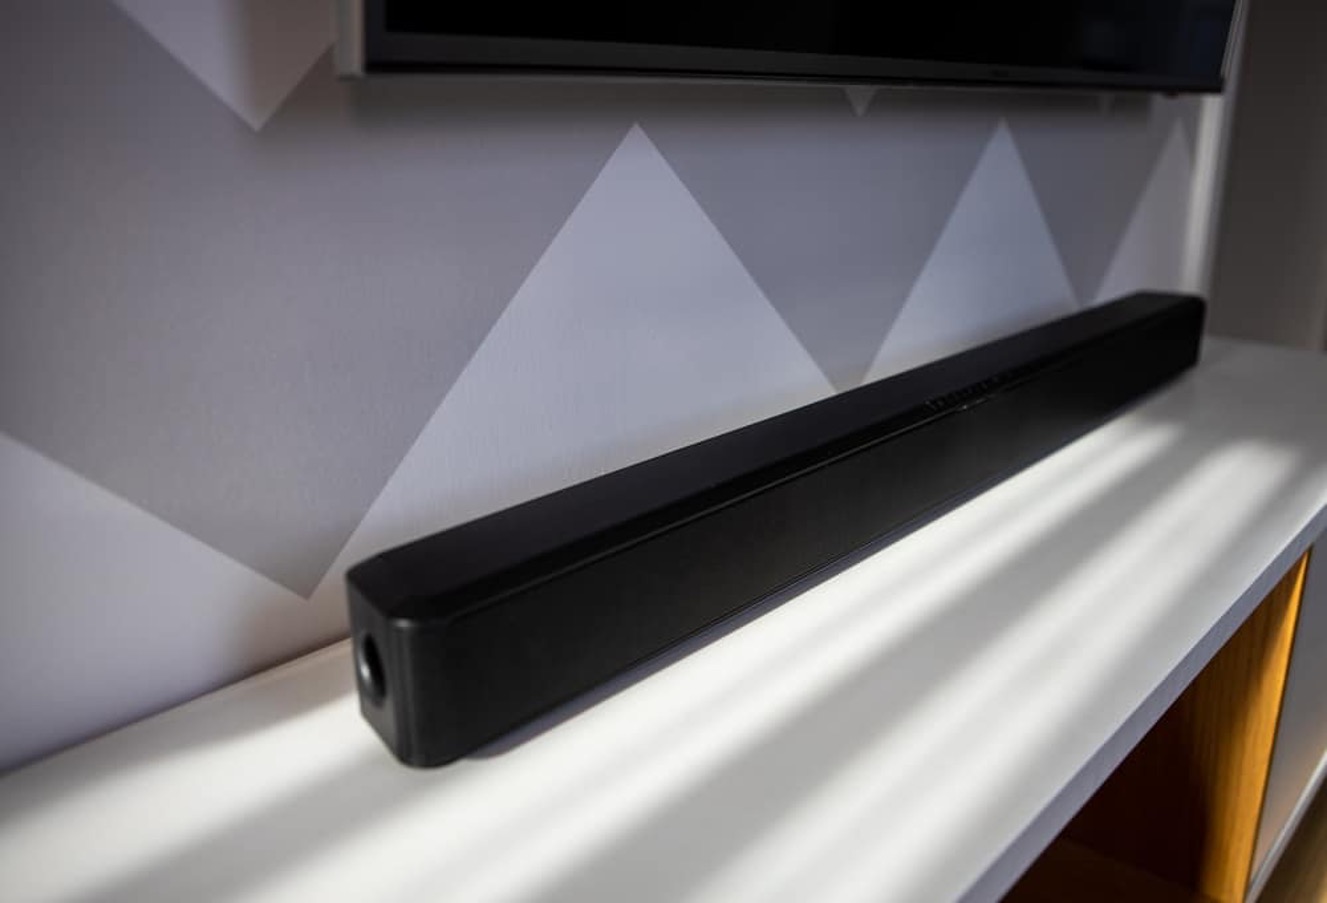 How To Turn On LG Soundbar SK1 Without A Remote